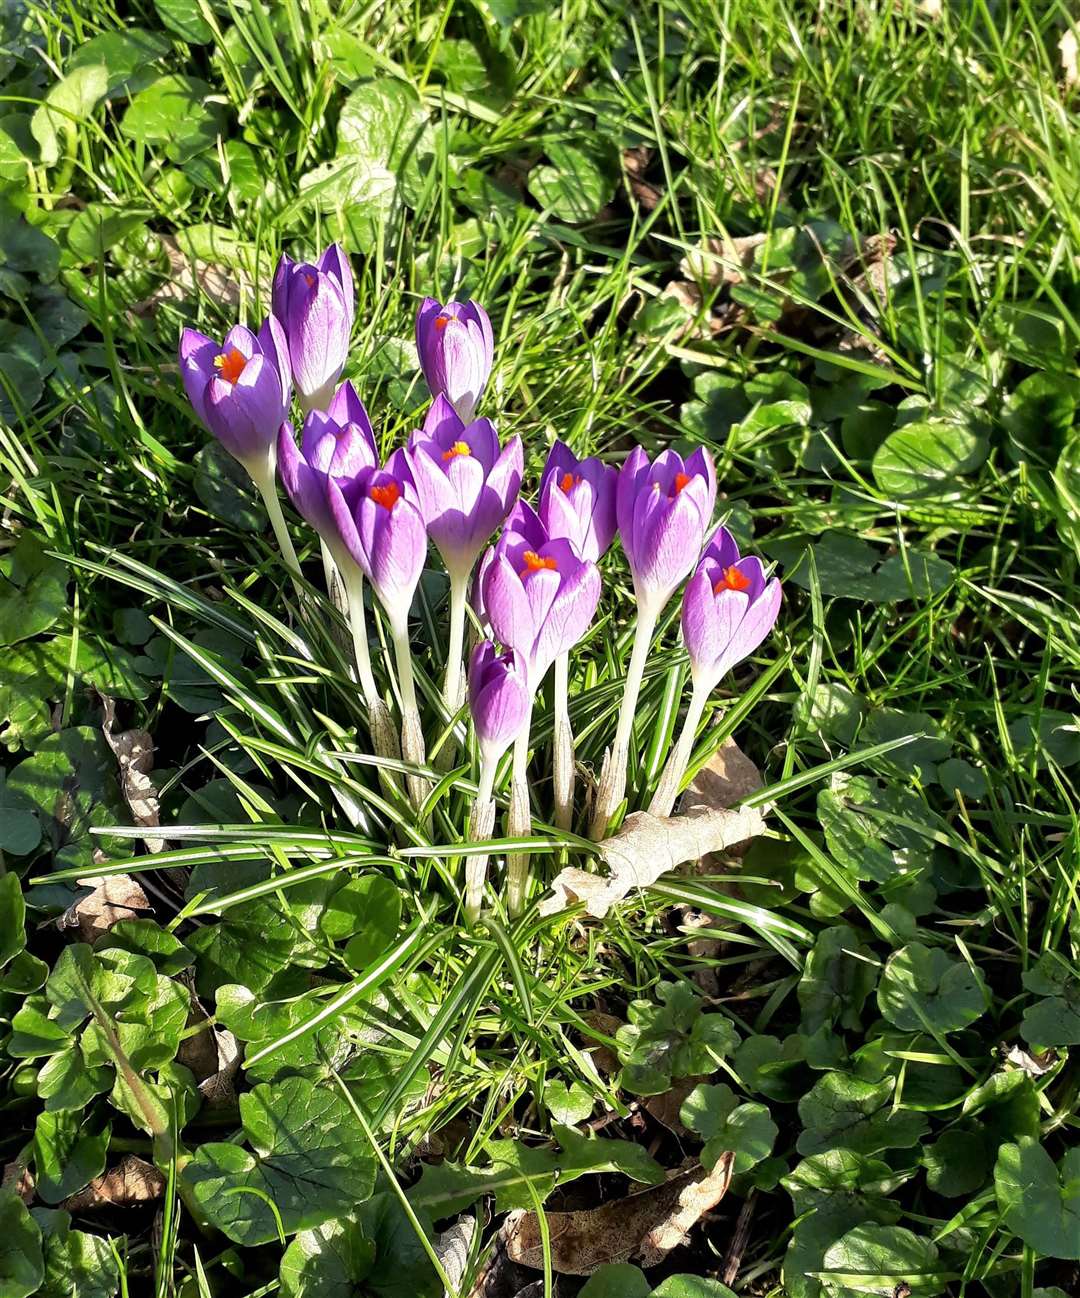 Despite the blustery conditions this crocus basked in a spot of sunshine at the weekend. Picture: Keith Banks